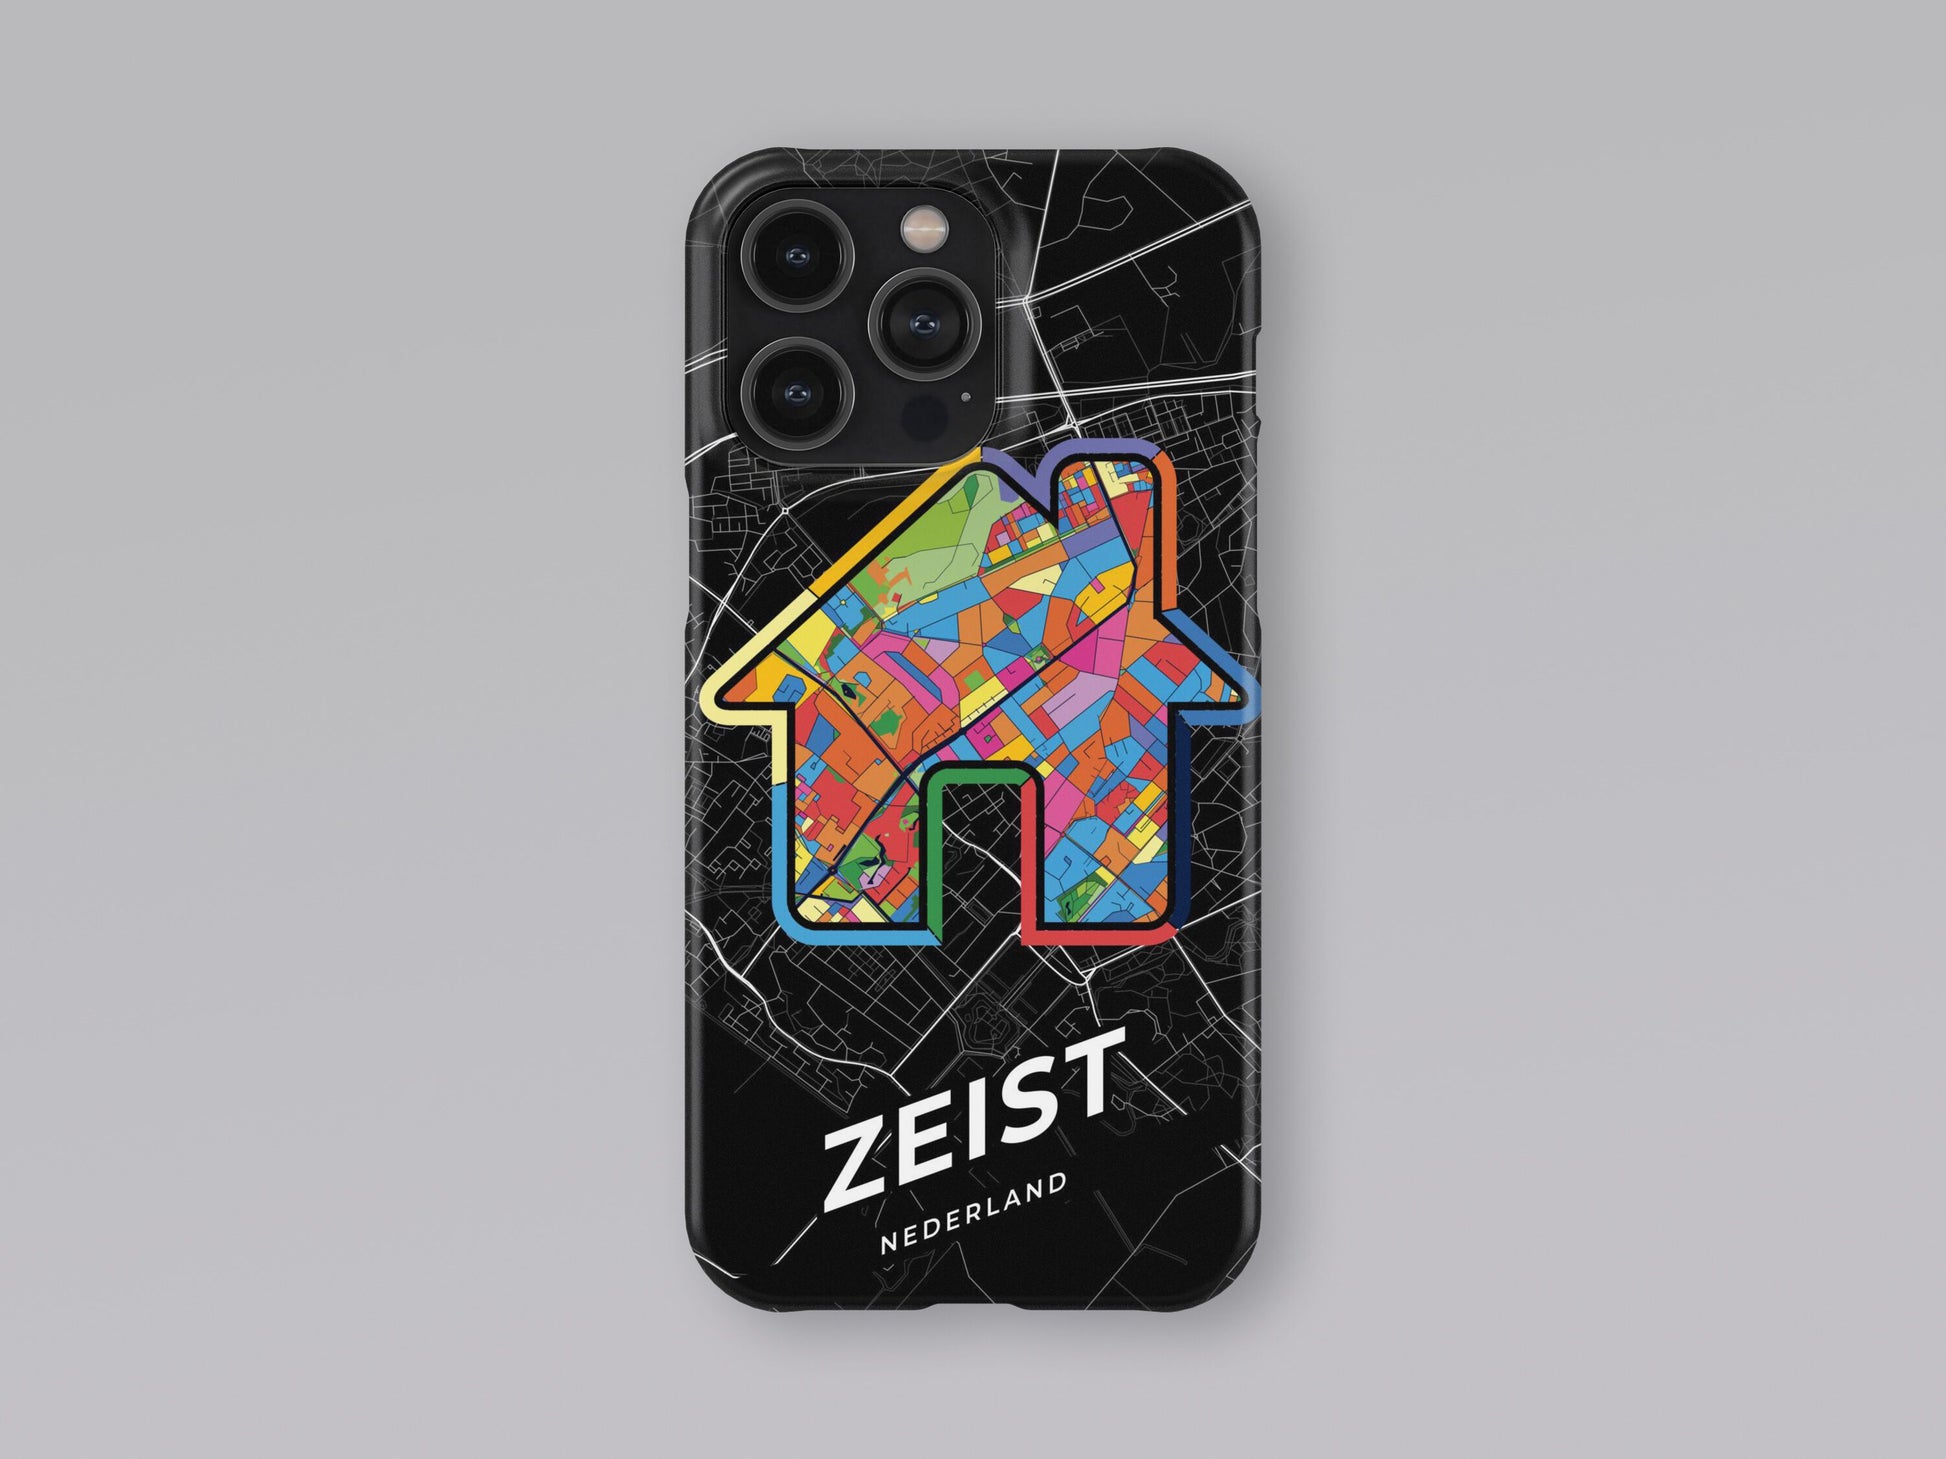 Zeist Netherlands slim phone case with colorful icon 3